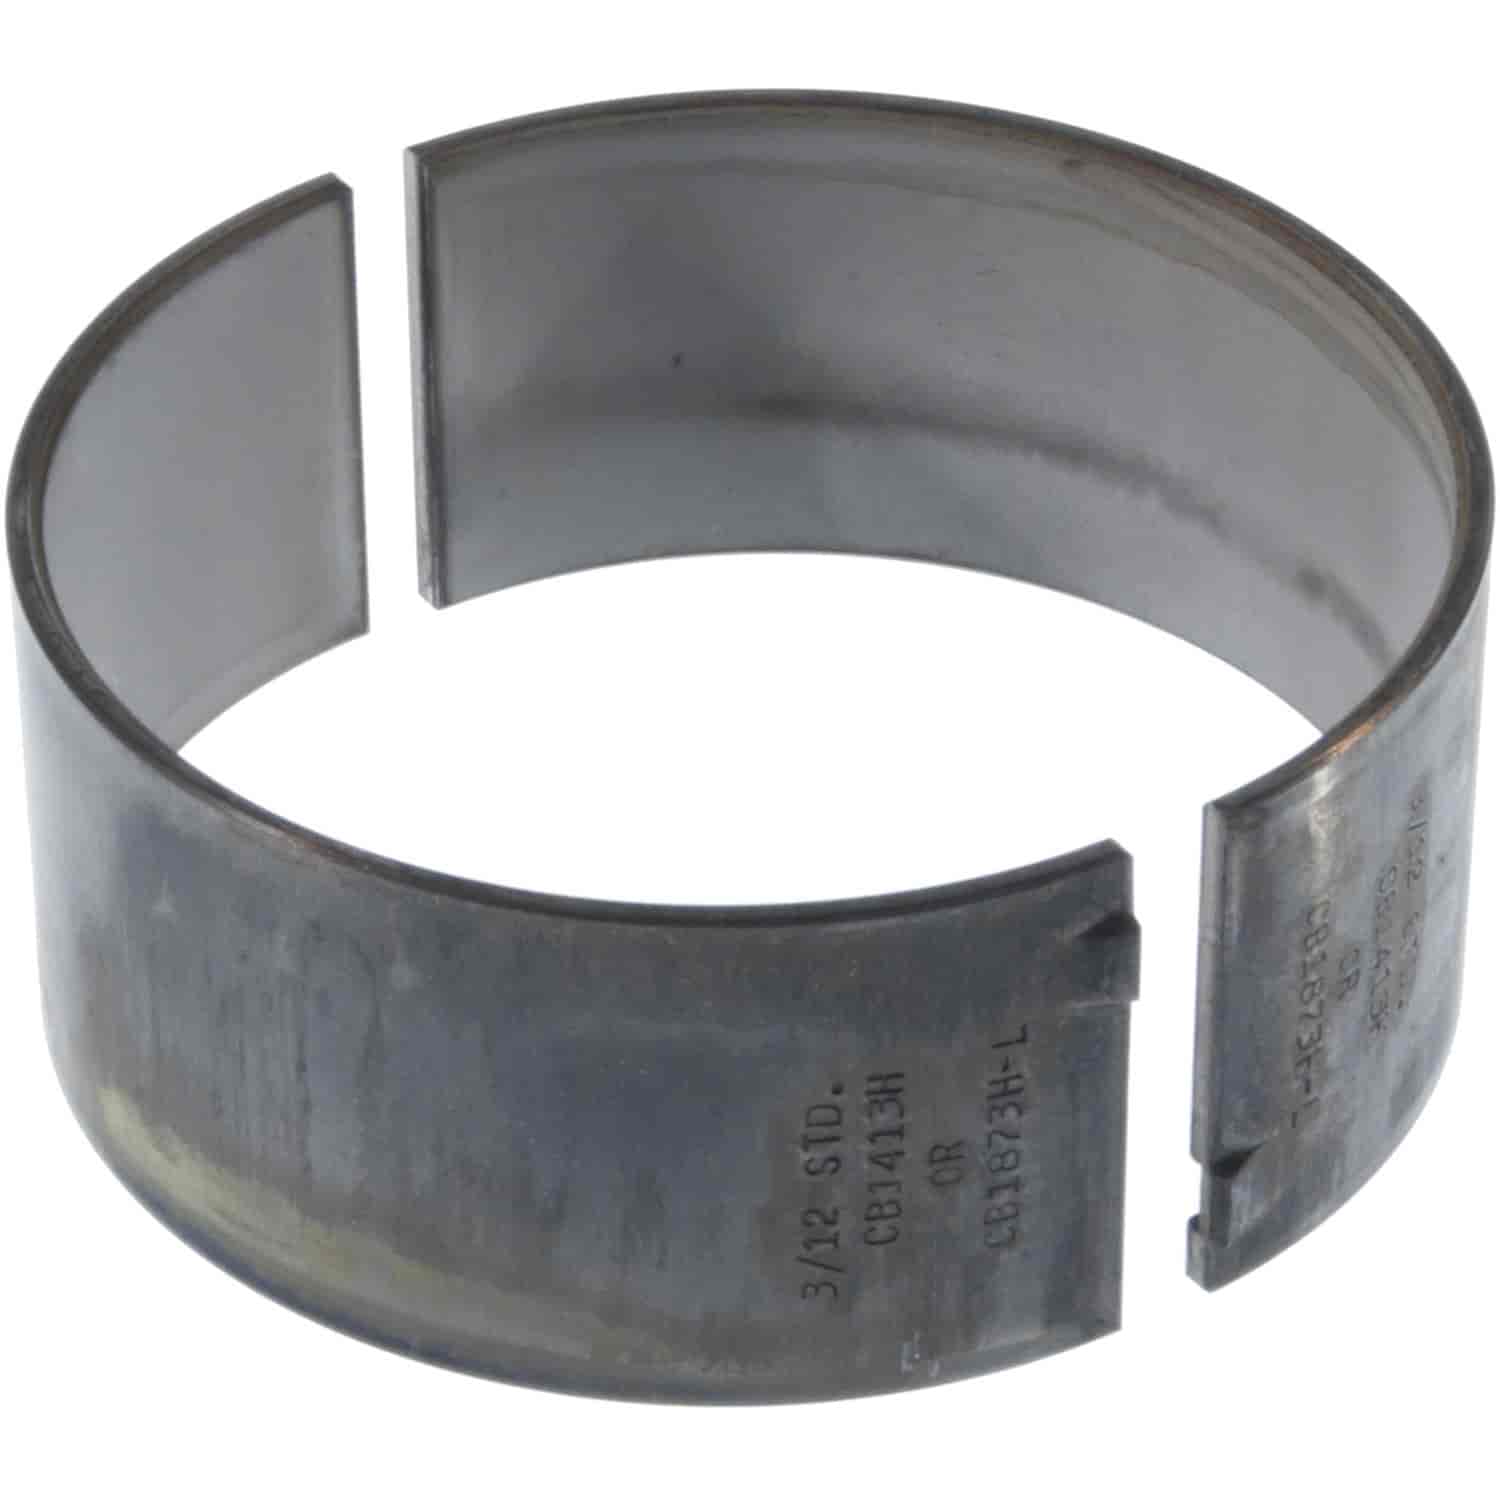 Connecting Rod Bearing Fits Cummins Diesel 1989-2002 4B 3.9L/6B 5.9L Non-Fractured Rod with Standard Size